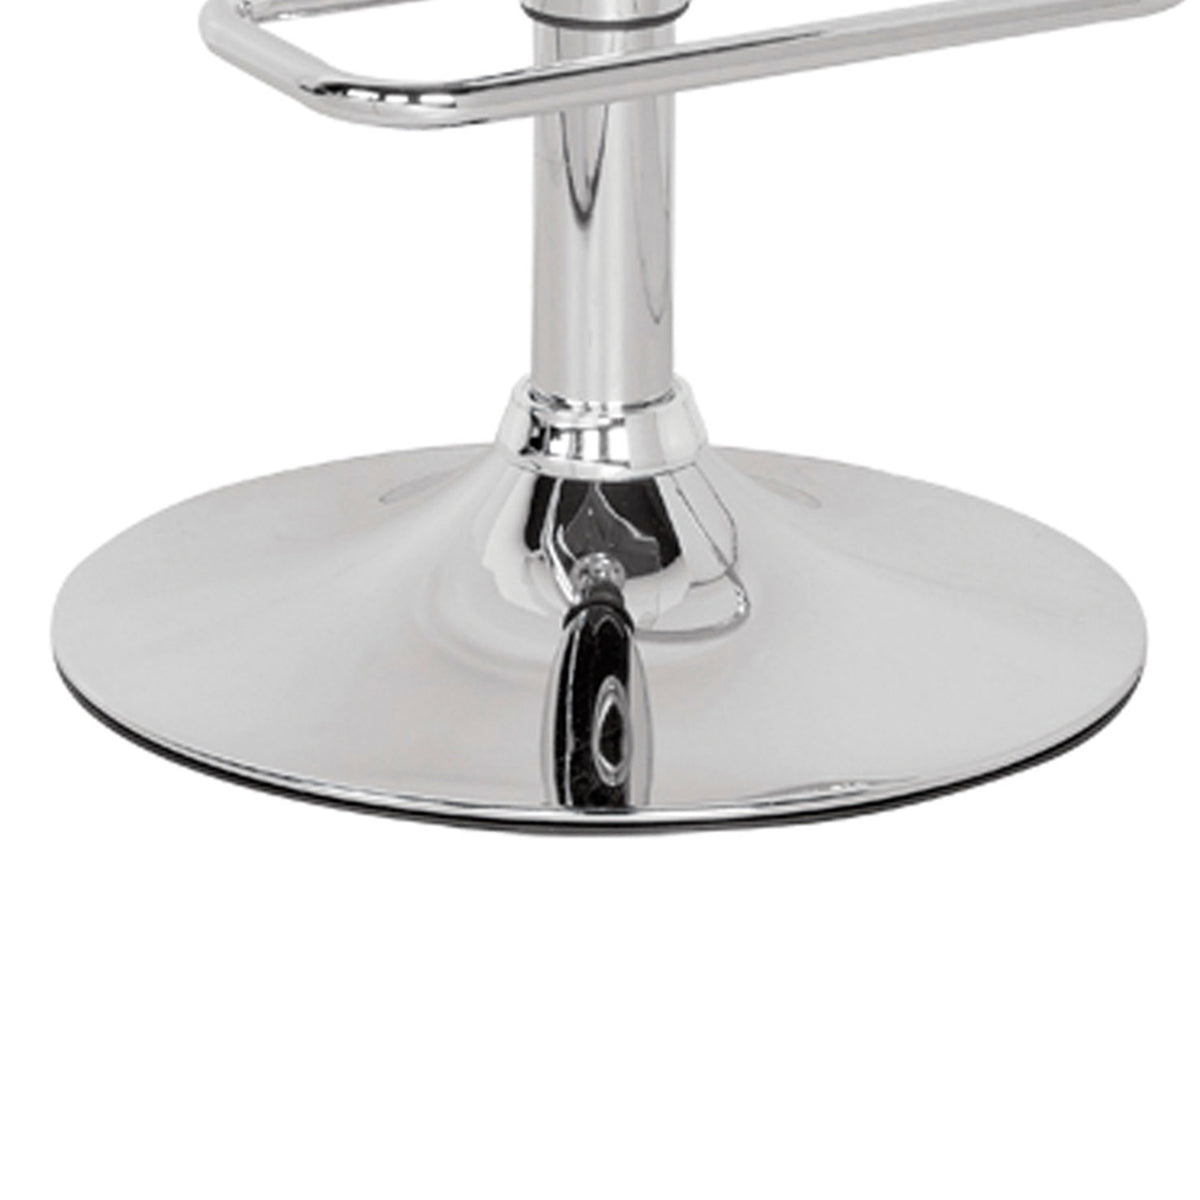 BM157348 Smart Looking Adjustable Stool with Swivel, Clear & Chrome